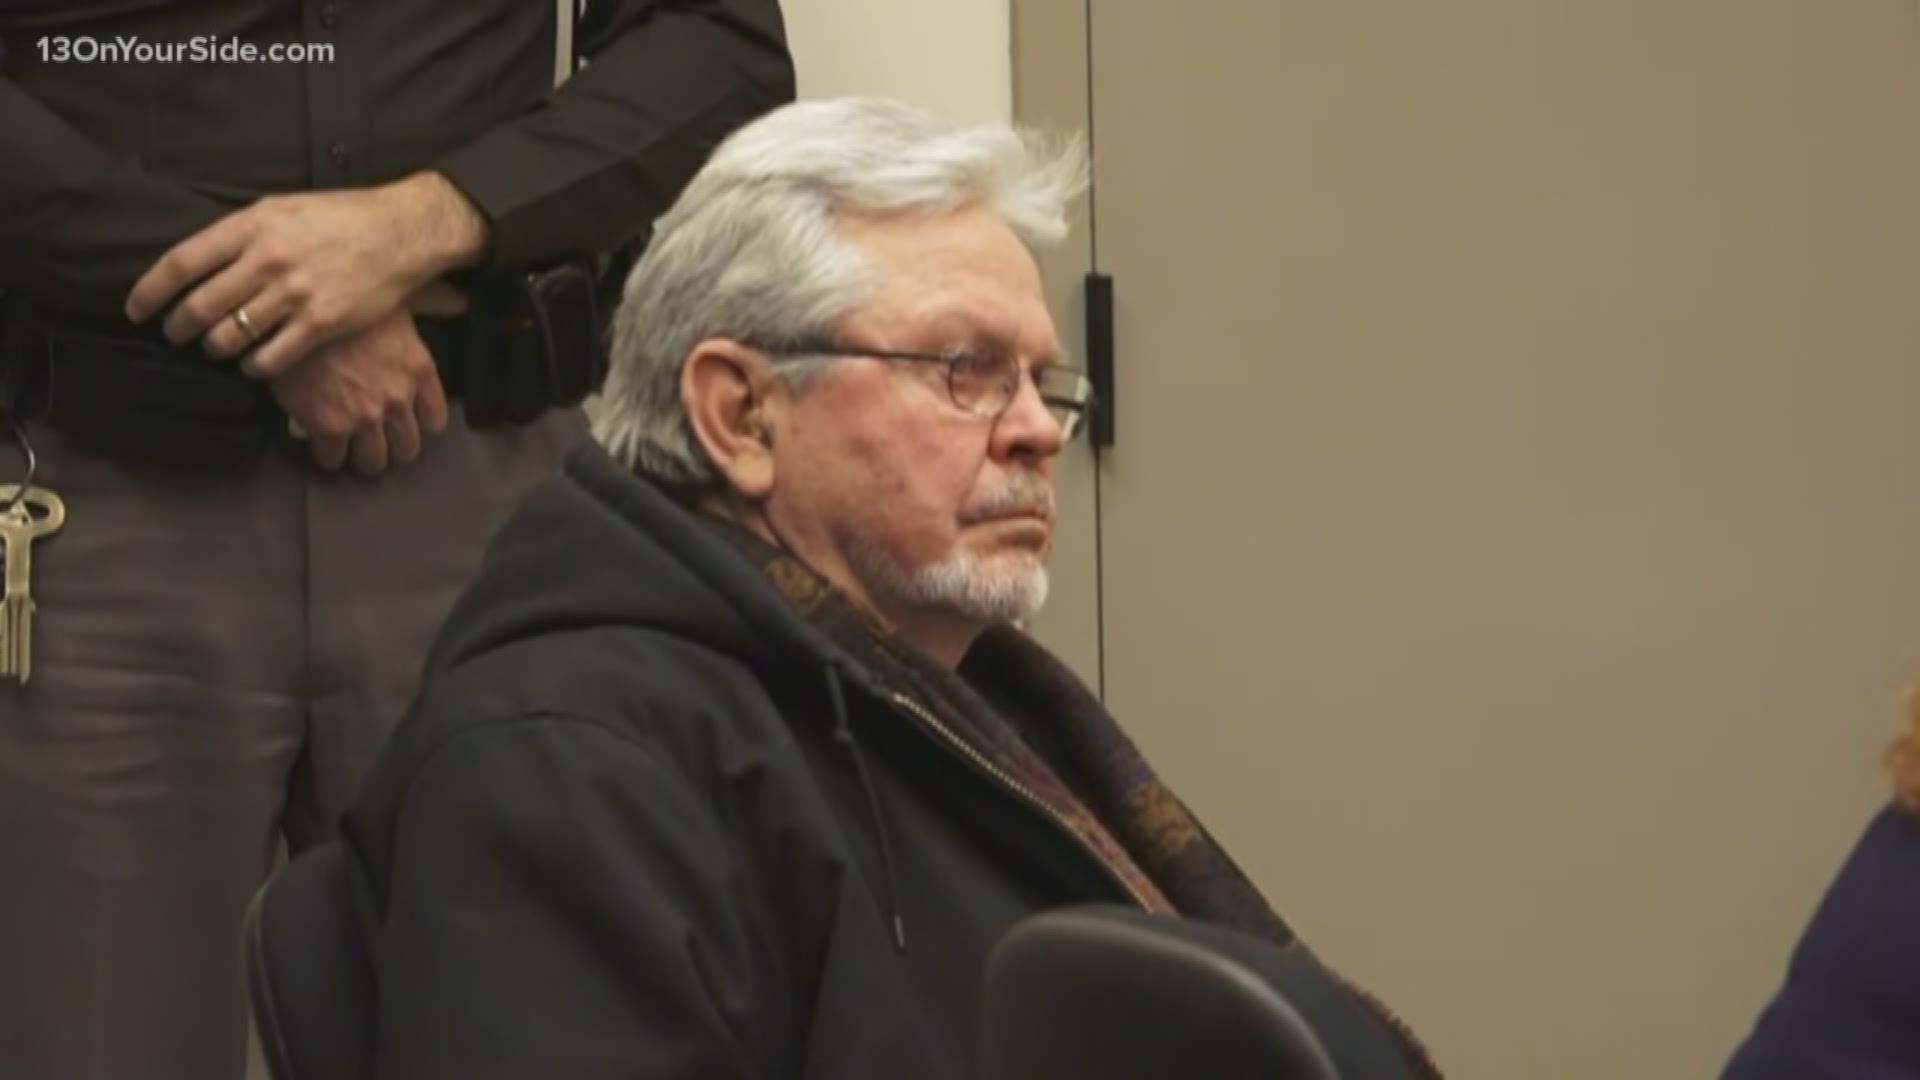 After two days of deliberations, the jury also found 77-year-old James Chance not guilty on one count of perjury, but could not decide on a second perjury count.